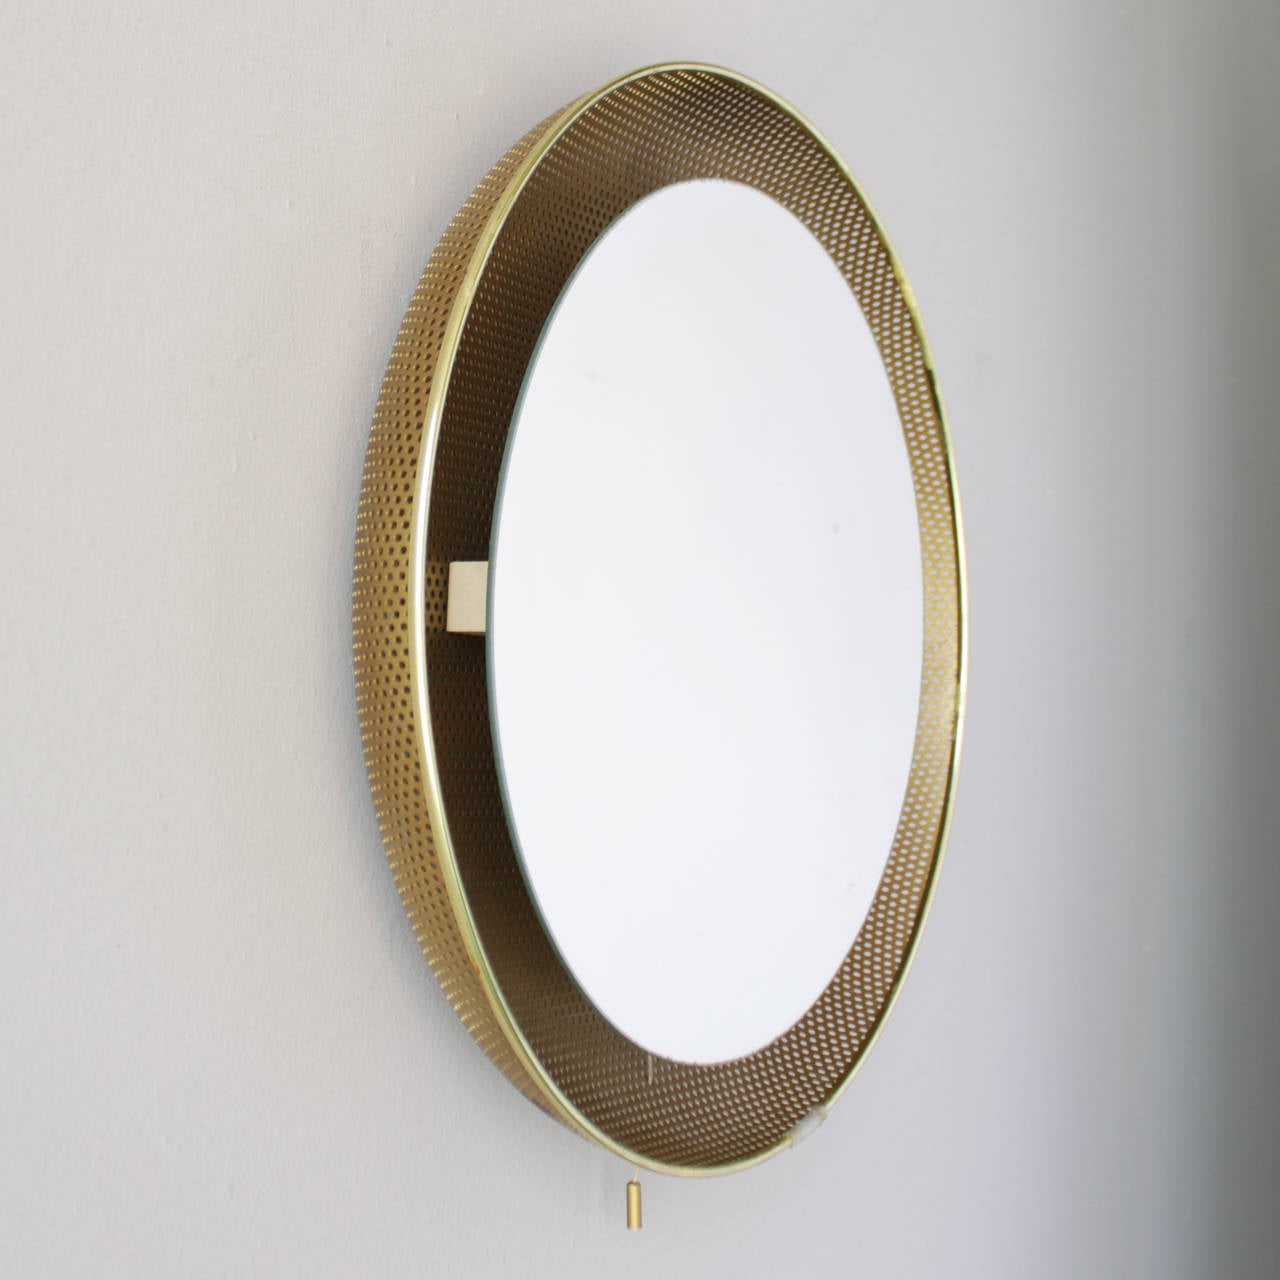 French Mirror Attributed to Mategot for Artimeta